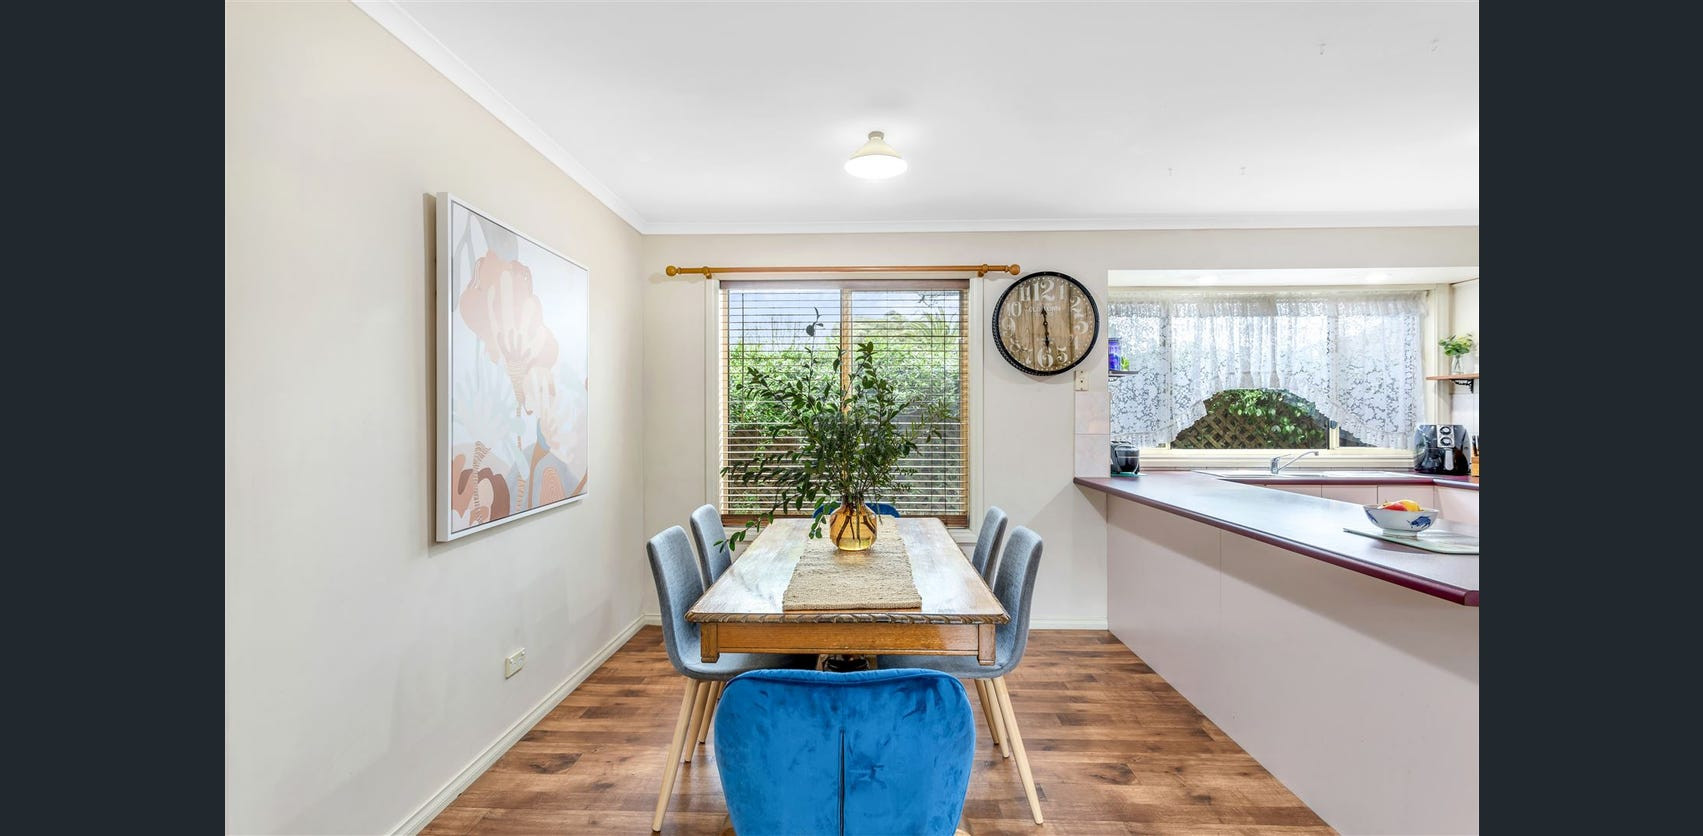 PARTIAL STYLING at 17 Market Place, Nairne